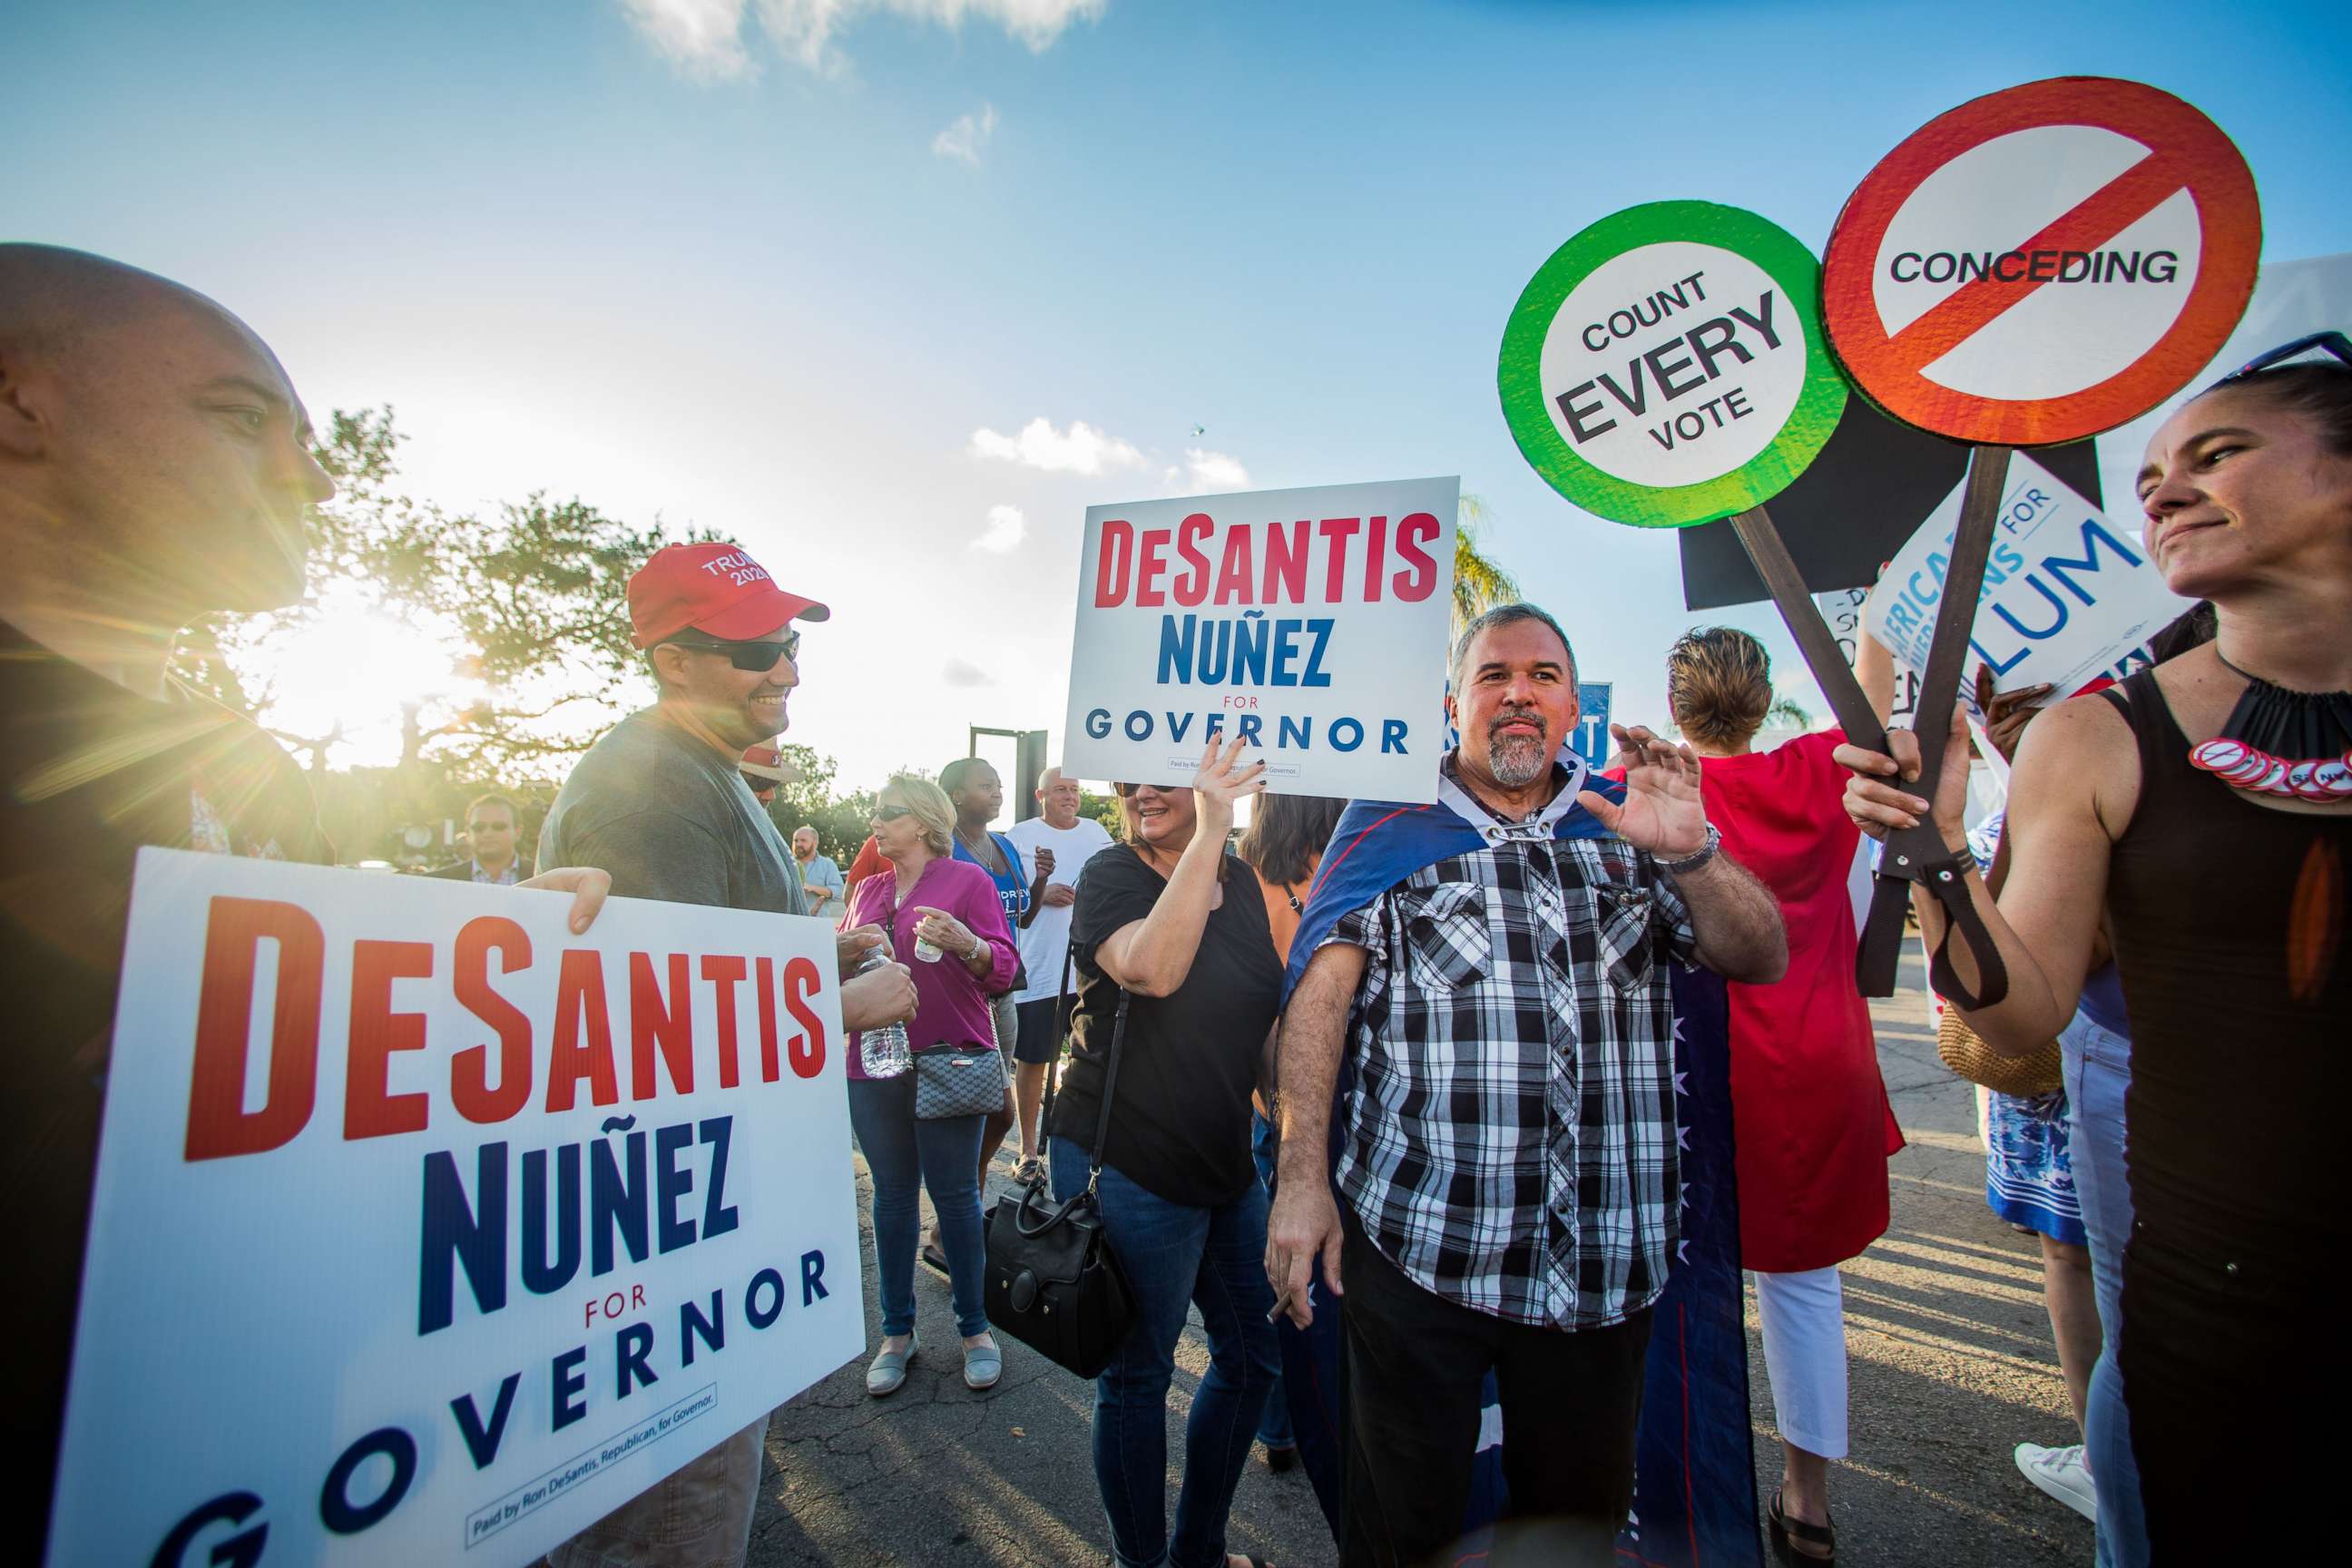 PHOTO: Supporters of Ron DeSantis and Rick Scott protest the handling of election results while clashing with Andrew Gillum supporters outside of the Broward County Supervisor of Elections Office in Lauderdhill, Fla., Nov. 9, 2018.